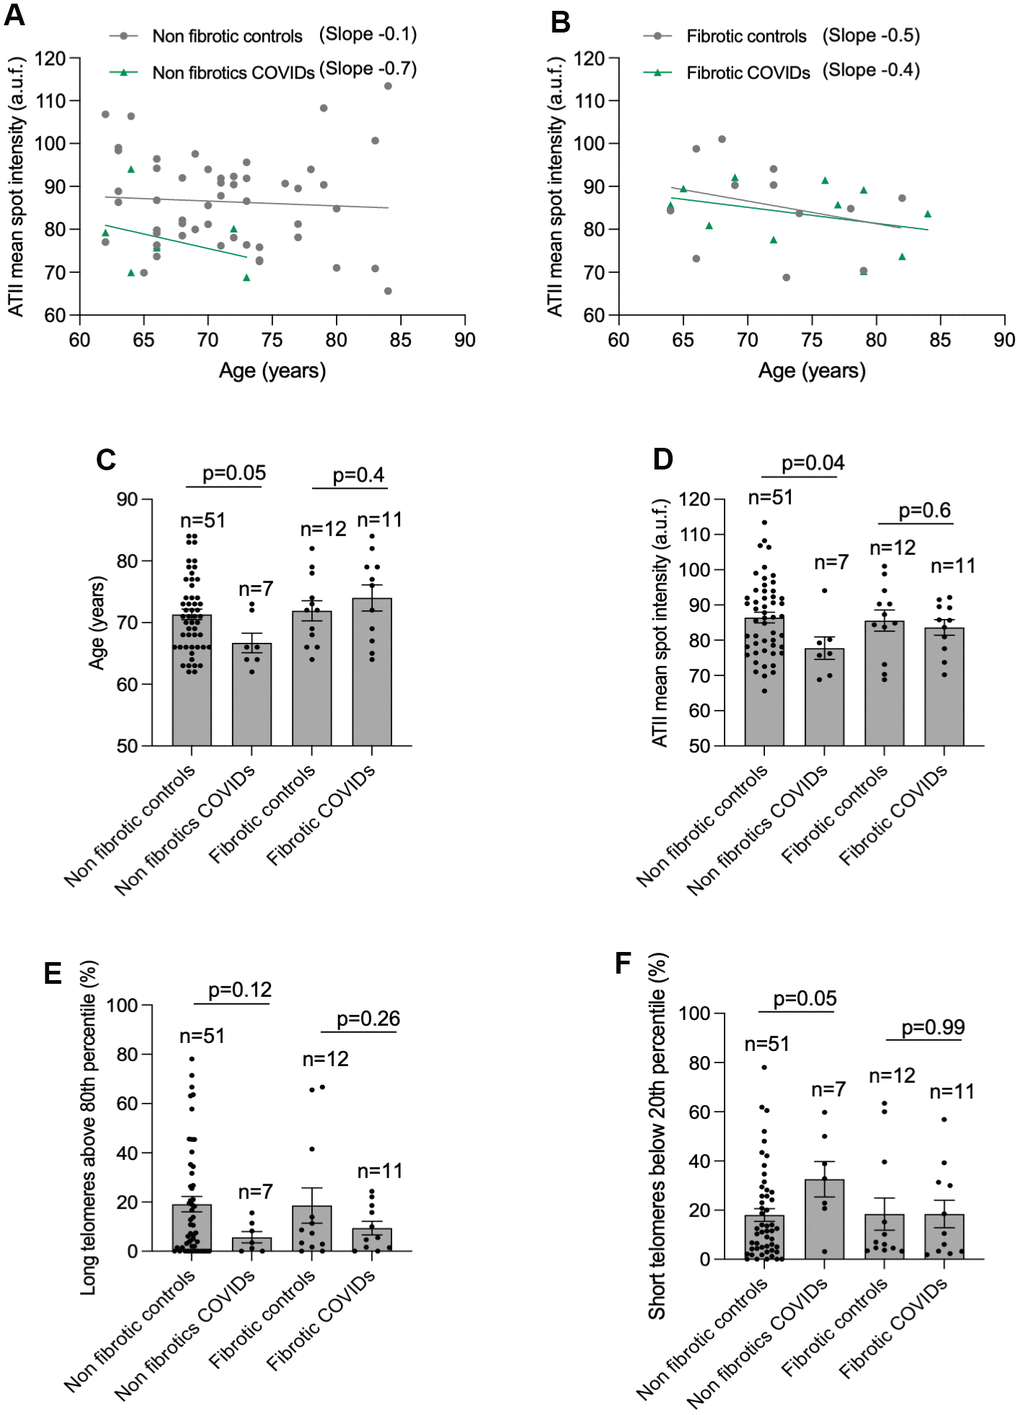 Higher rate of telomere shortening with age in COVID-19 patients. (A, B) Linear regression analyses between telomere intensity in pro-SPC positive cells and age in lung section from control and COVID-19 patients not presenting lung fibrosis (A) or being histopathologically diagnosed with lung fibrosis (B) post-surgery. The slope of the linear regression is shown. (C) Mean age of control and COVID-19 patients within 62 and 84 year-old interval presenting or not lung fibrosis post-surgery. (D–F) Mean telomeric spot intensity per nucleus (D), percentage of long telomeres above 80th percentile (E) and percentage of short telomeres below 20th percentile (F) in alveolar type II in lung sections from control and COVID-19 patients within 62 and 84 year-old age interval. Statistical significance in (C–F) was assessed using unpaired Student’s t test and the p-value is indicated.